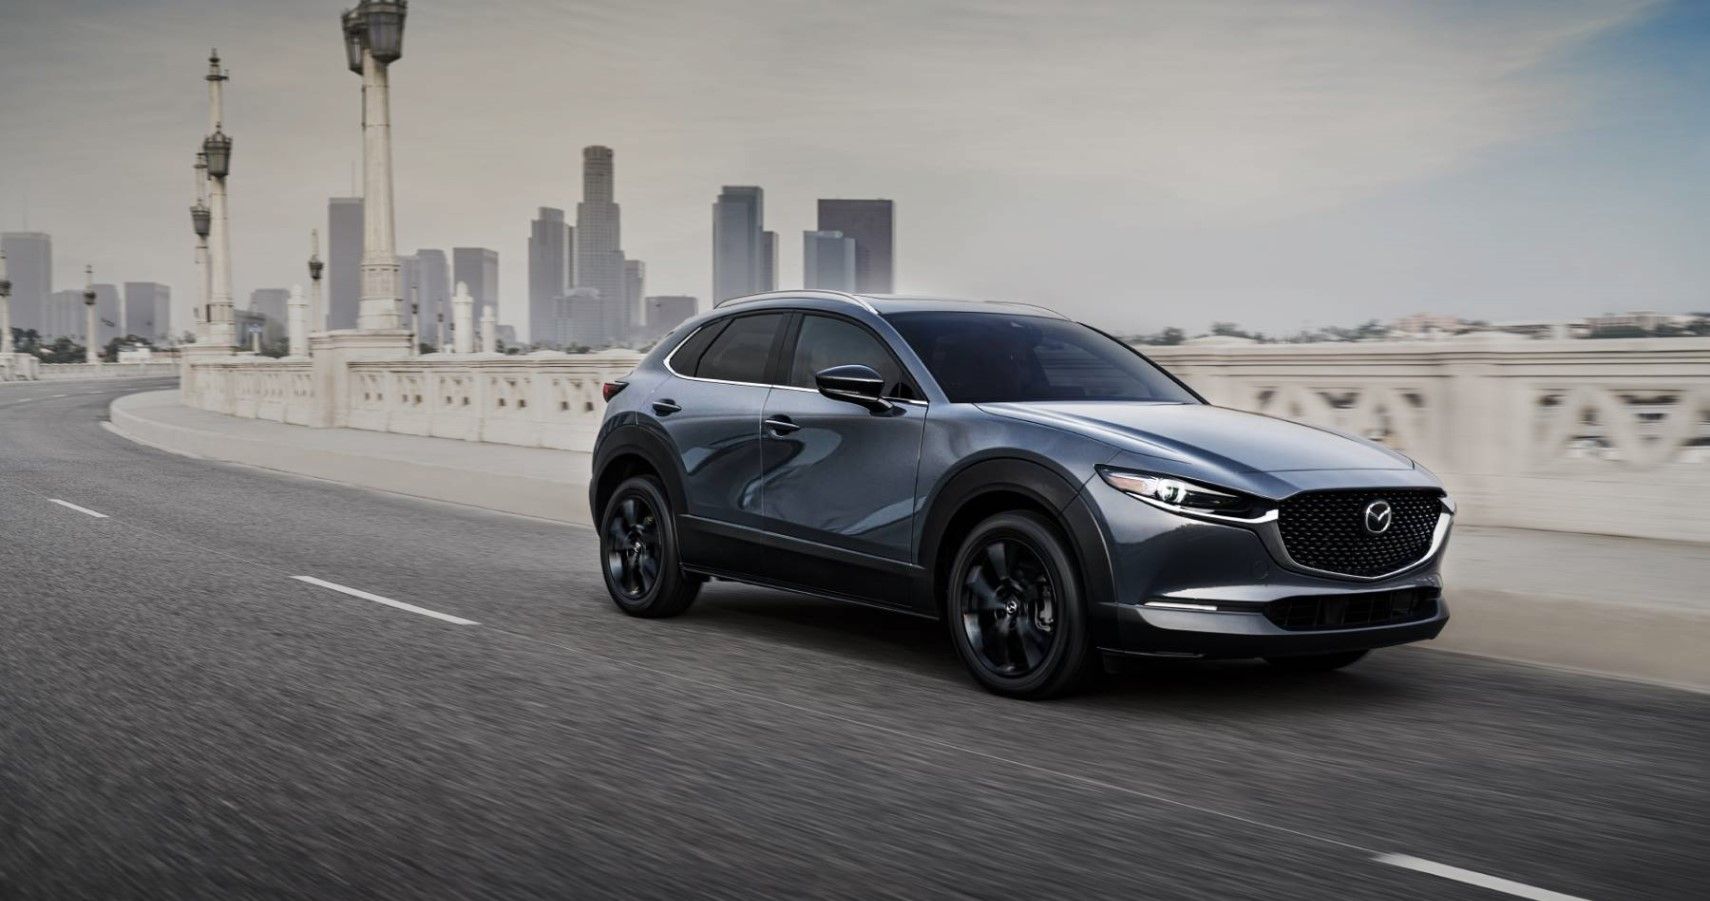 2022 Mazda CX-30 front third quarter rolling view